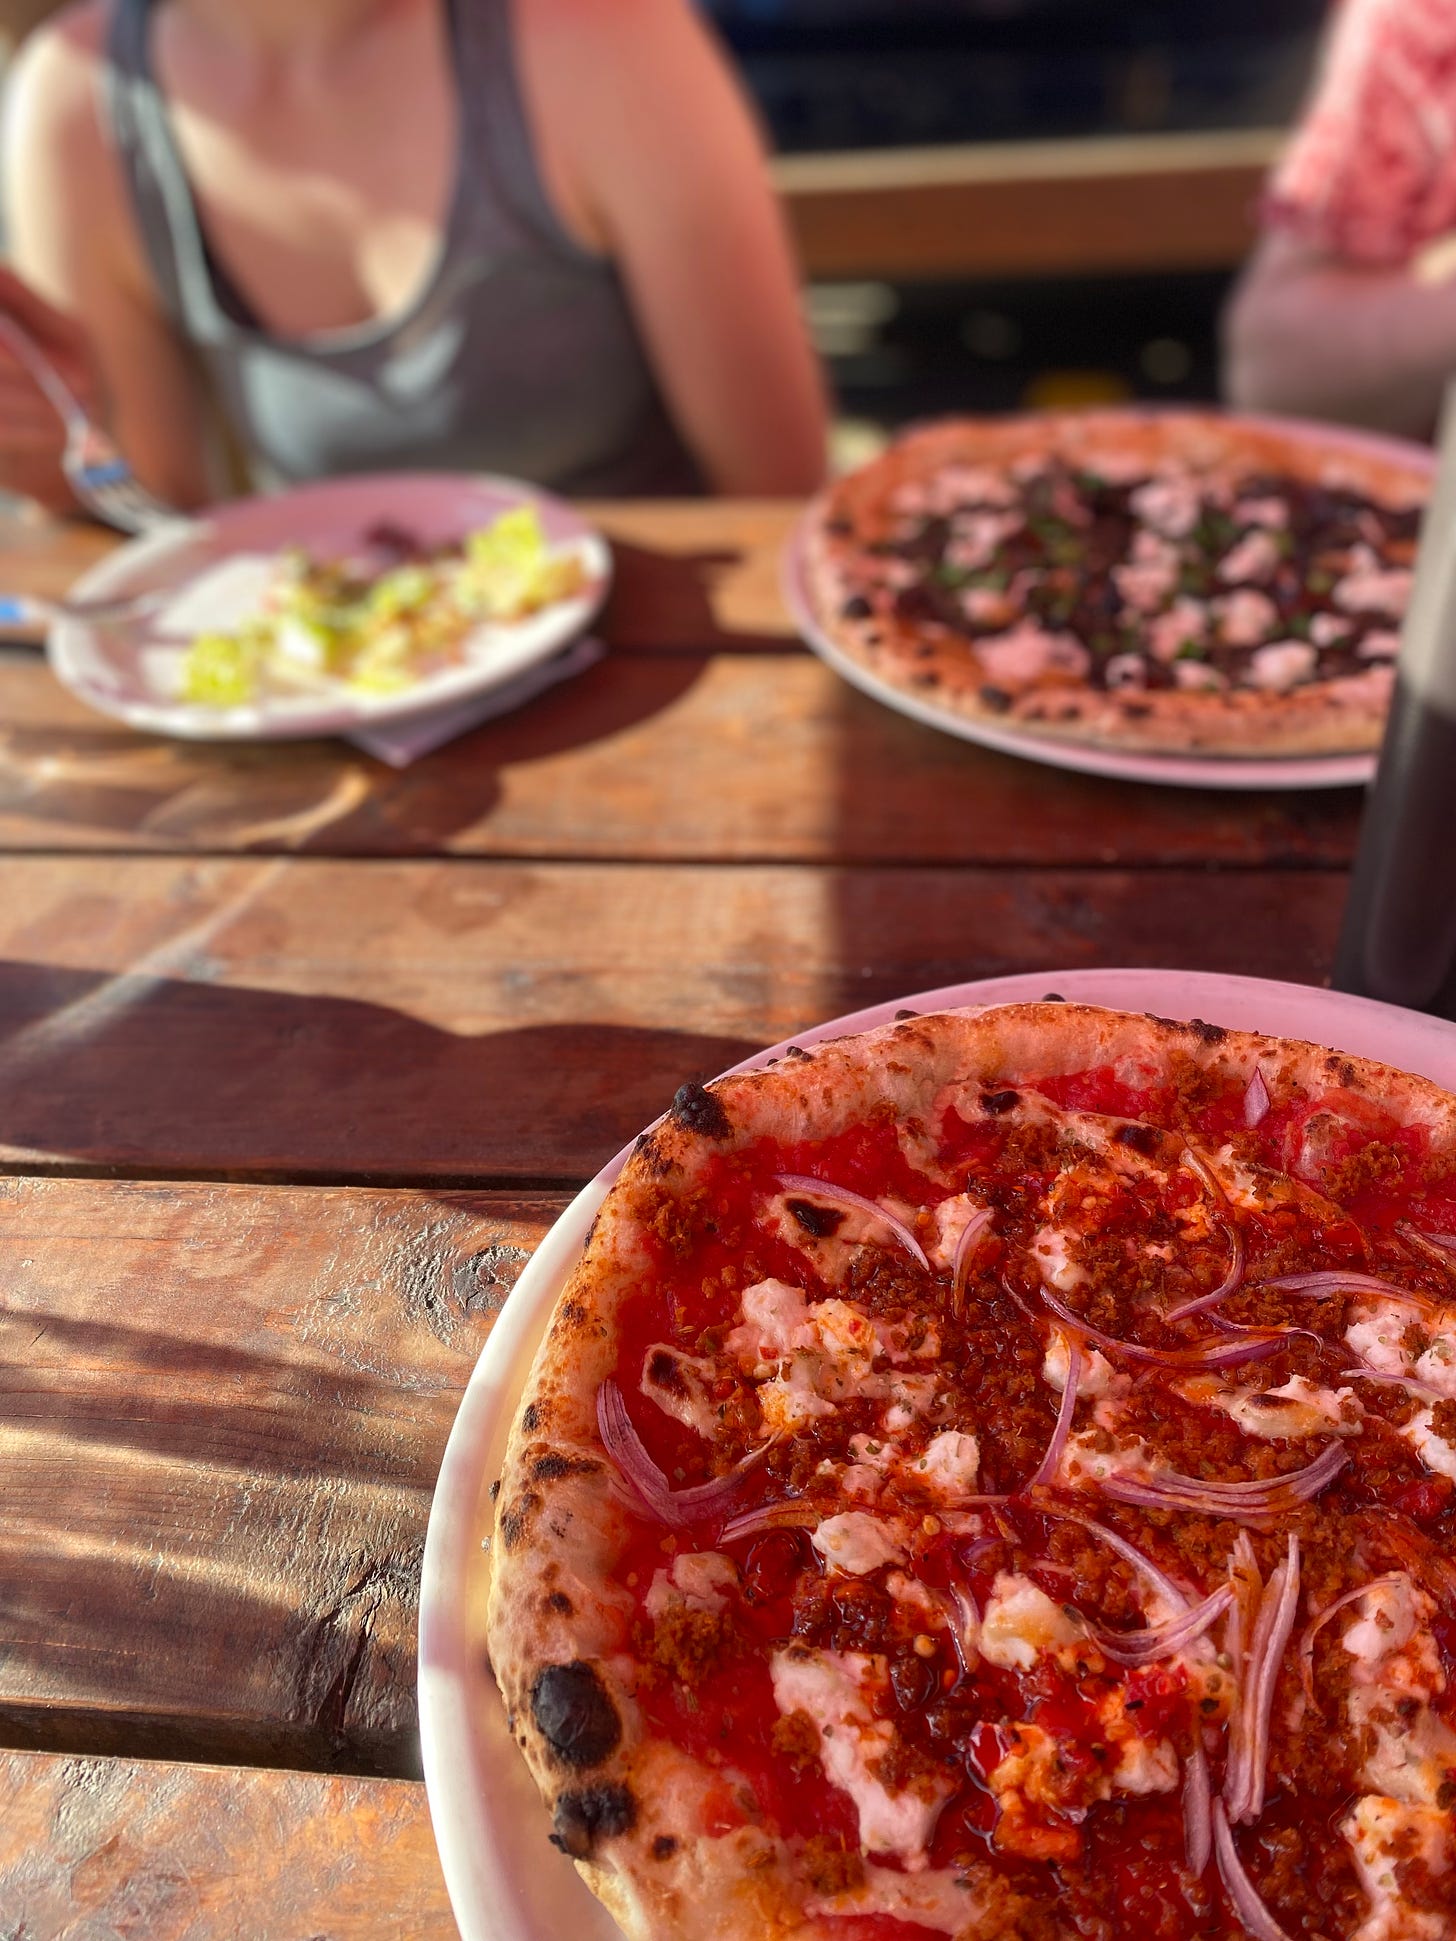 A wood patio table partially in the sun, with two pizzas on large plates across from each other. In the foreground is the bee sting, with chilies, red onion, crumbled 'meat' and cheese over red sauce; in the background, mushrooms and dollops of creamy cheese dusted with parsley. Natalie sits to the left, her plate still with a little caesar salad on it.